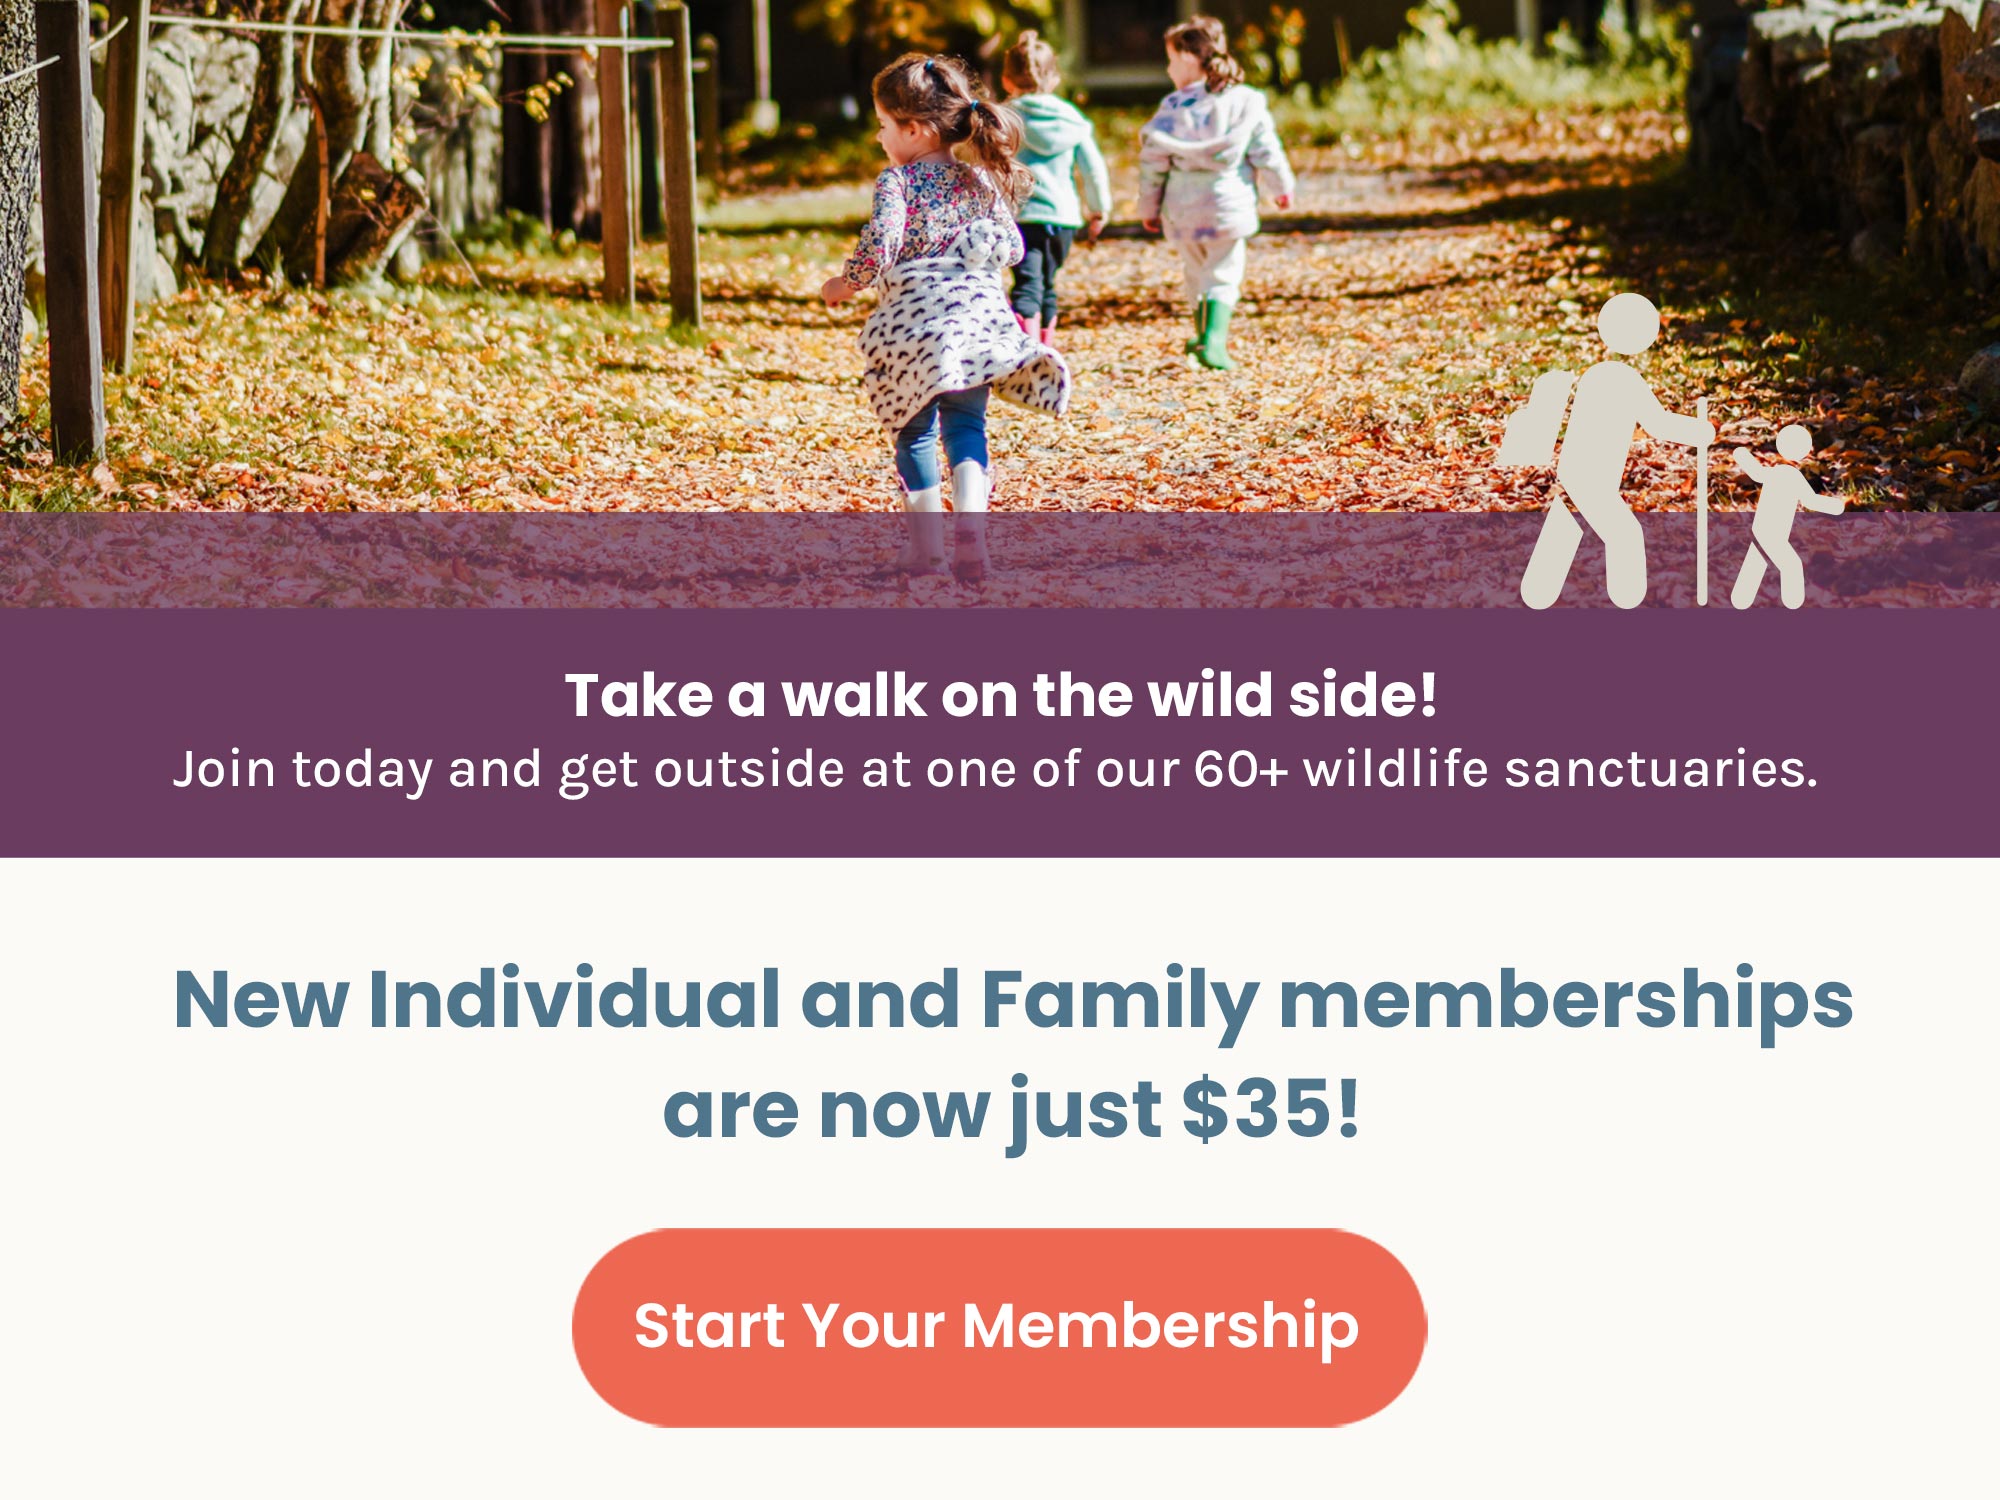 New Individual and Family memberships now just $35. Start your membership >